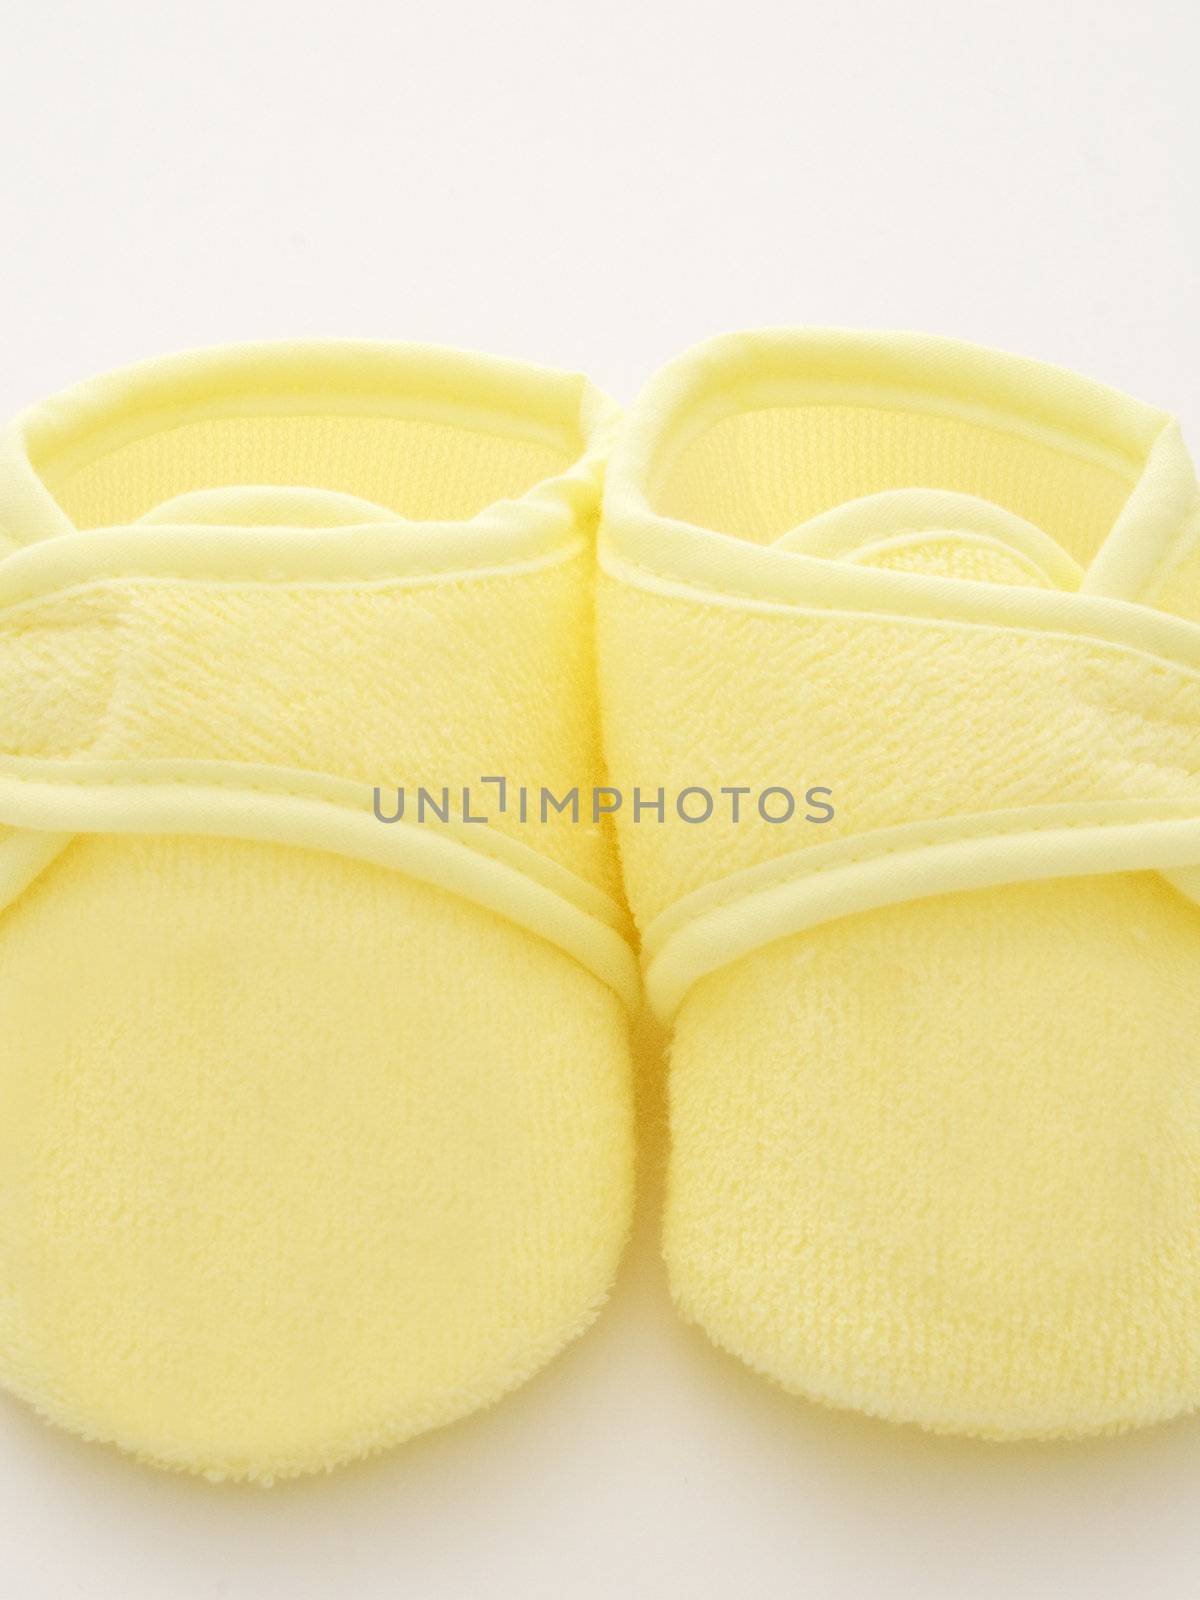 babies first pair of shoes in a yellow towelling material